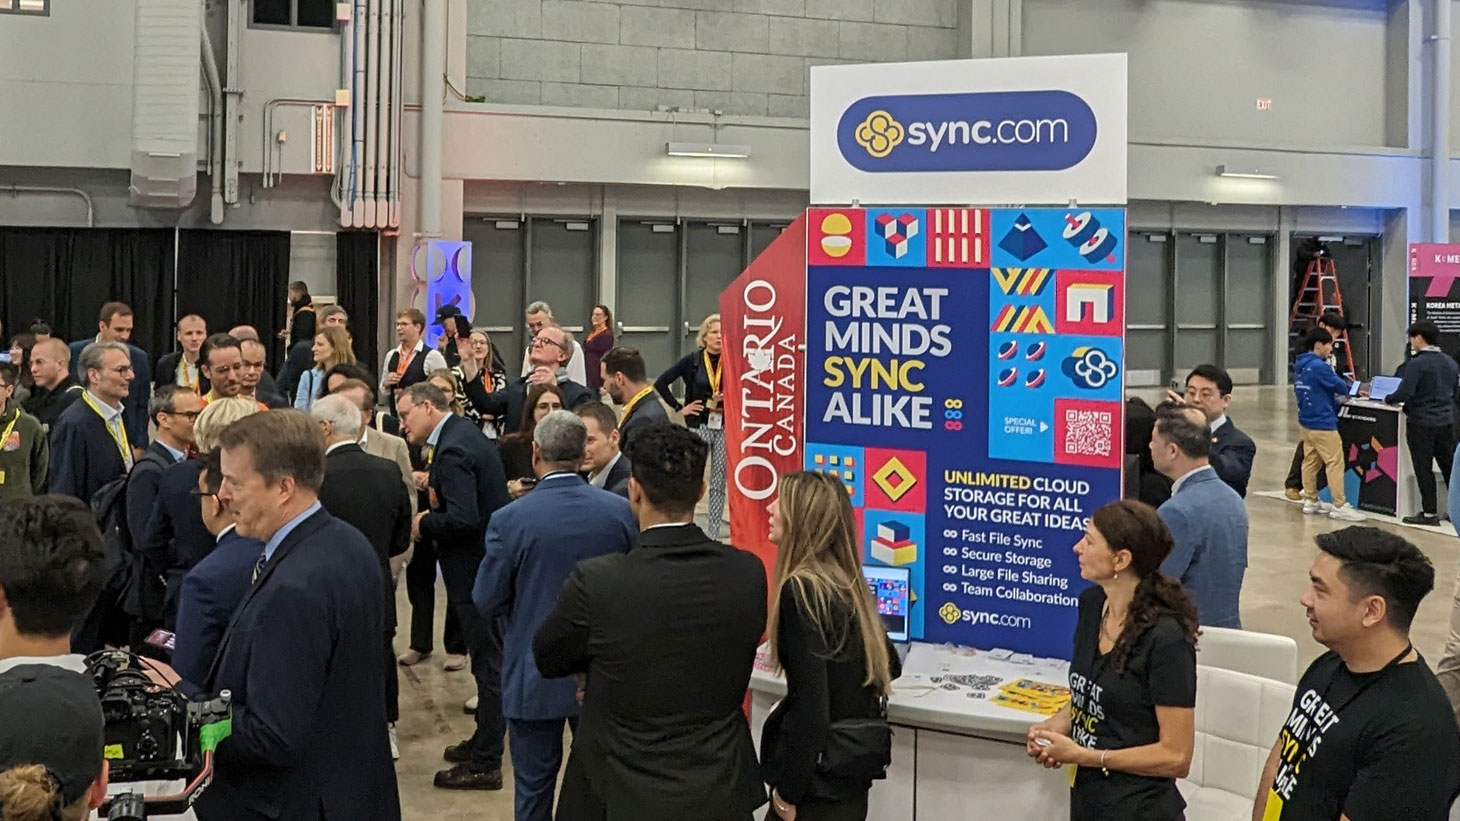 Sync.com attending South by Southwest